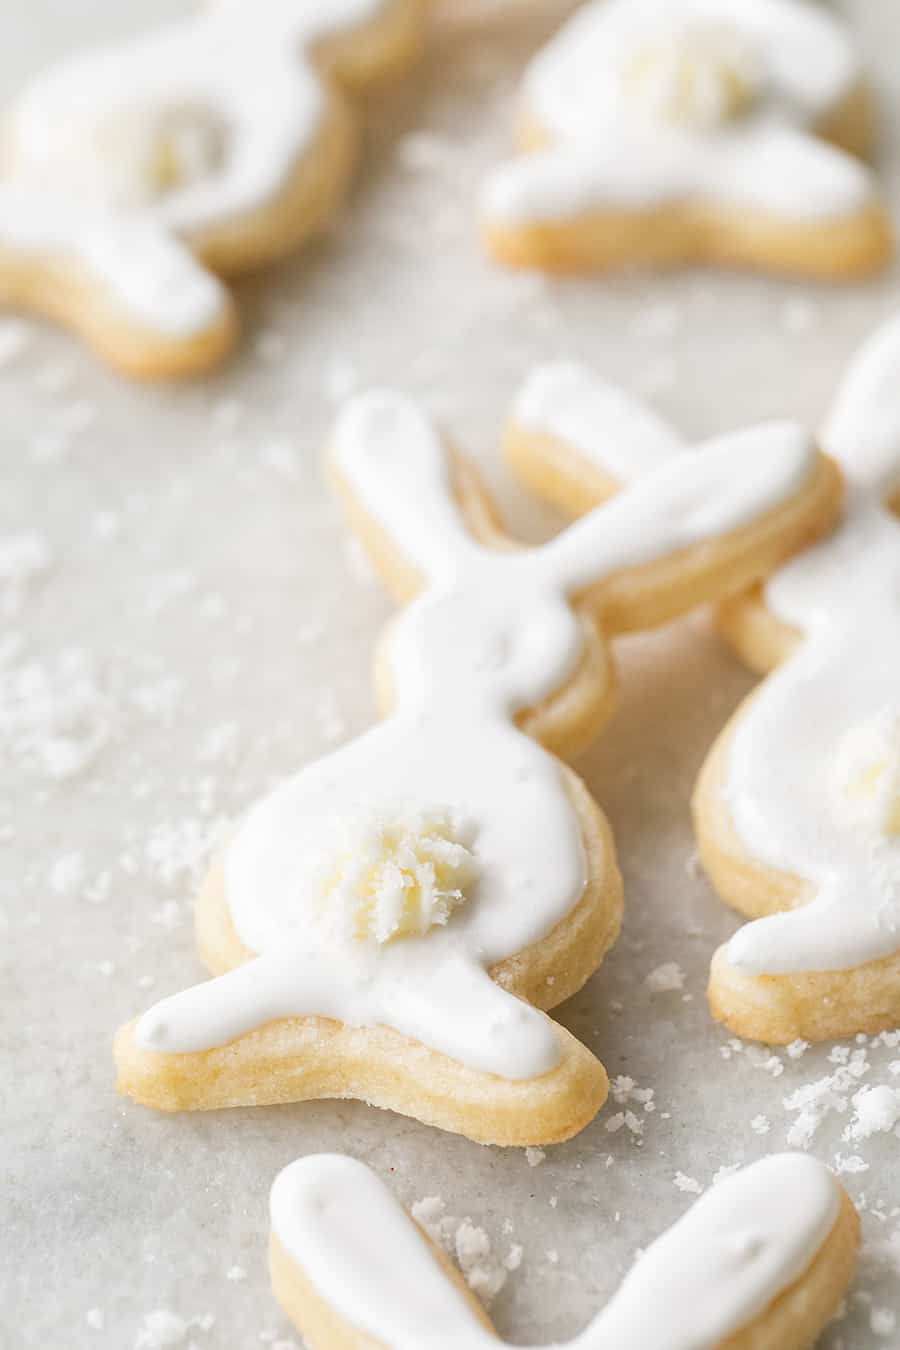 Bunny sugar cookies with a buttercream tail and royal icing.